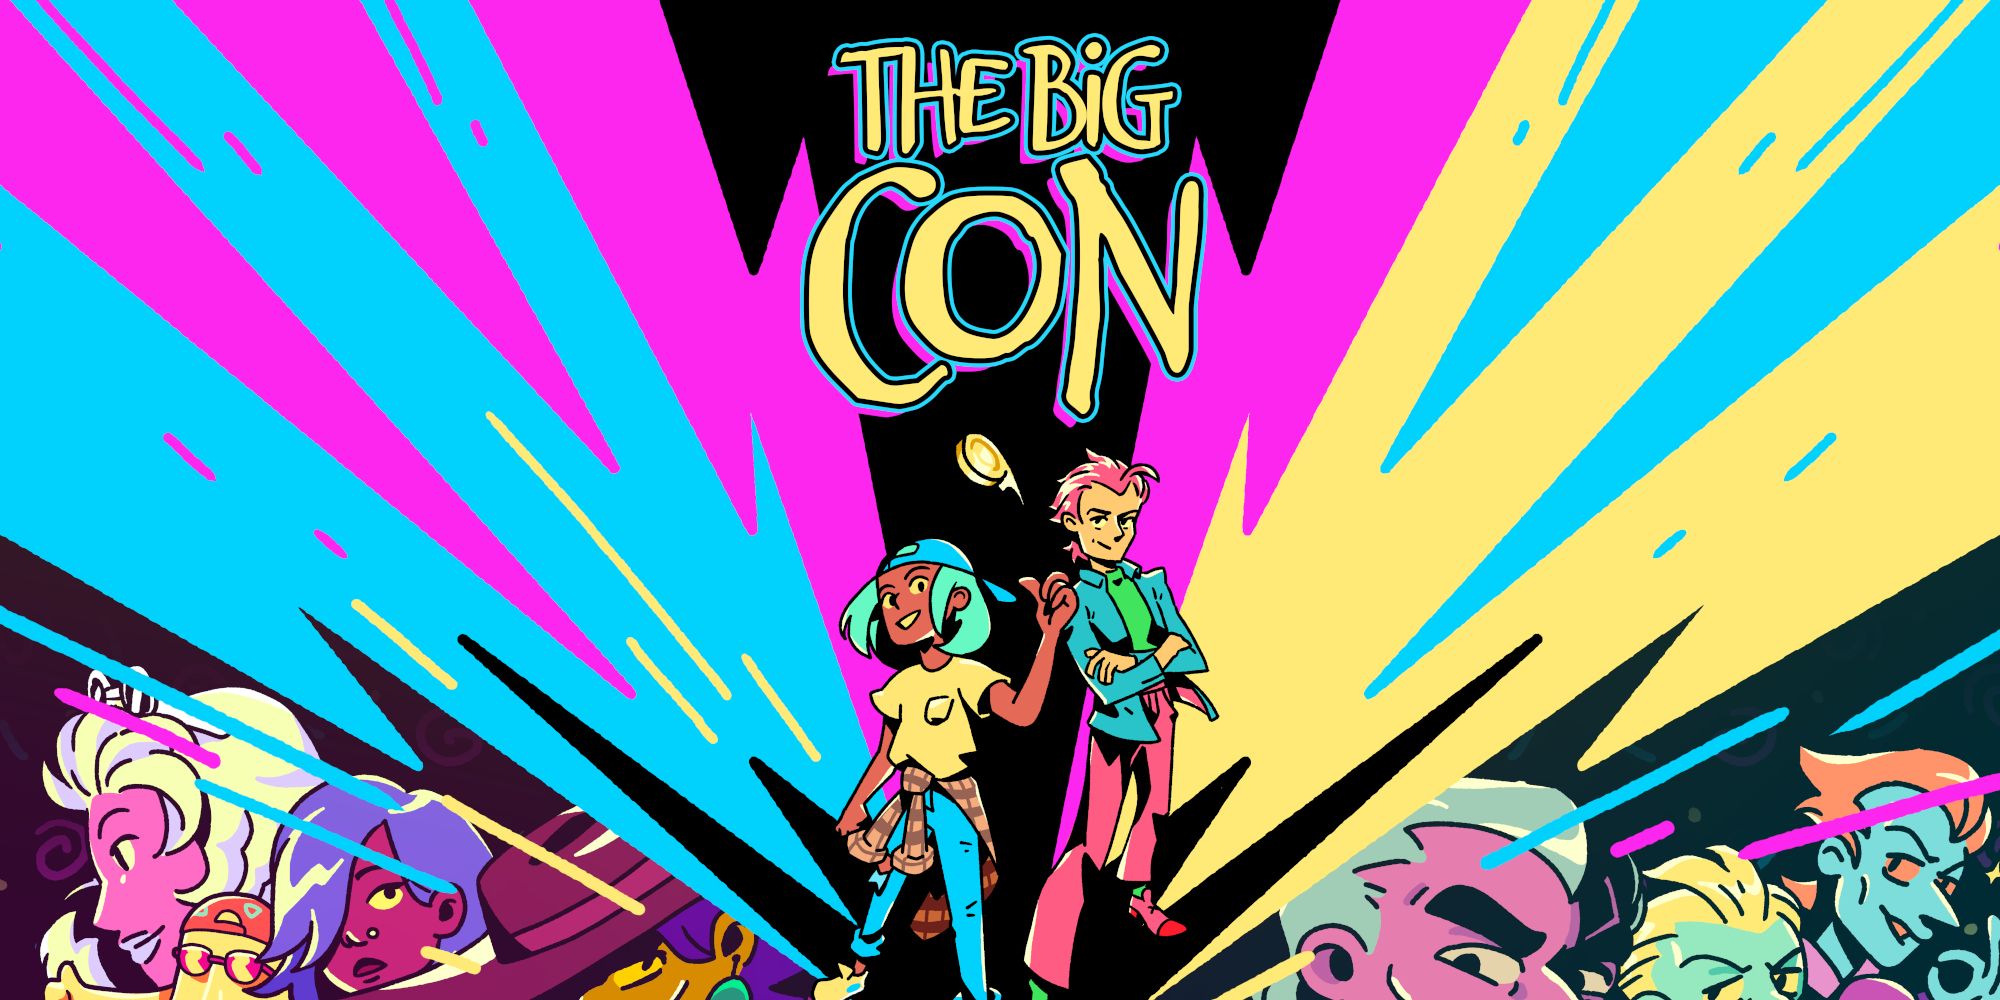 The Big Con Art with main characters.